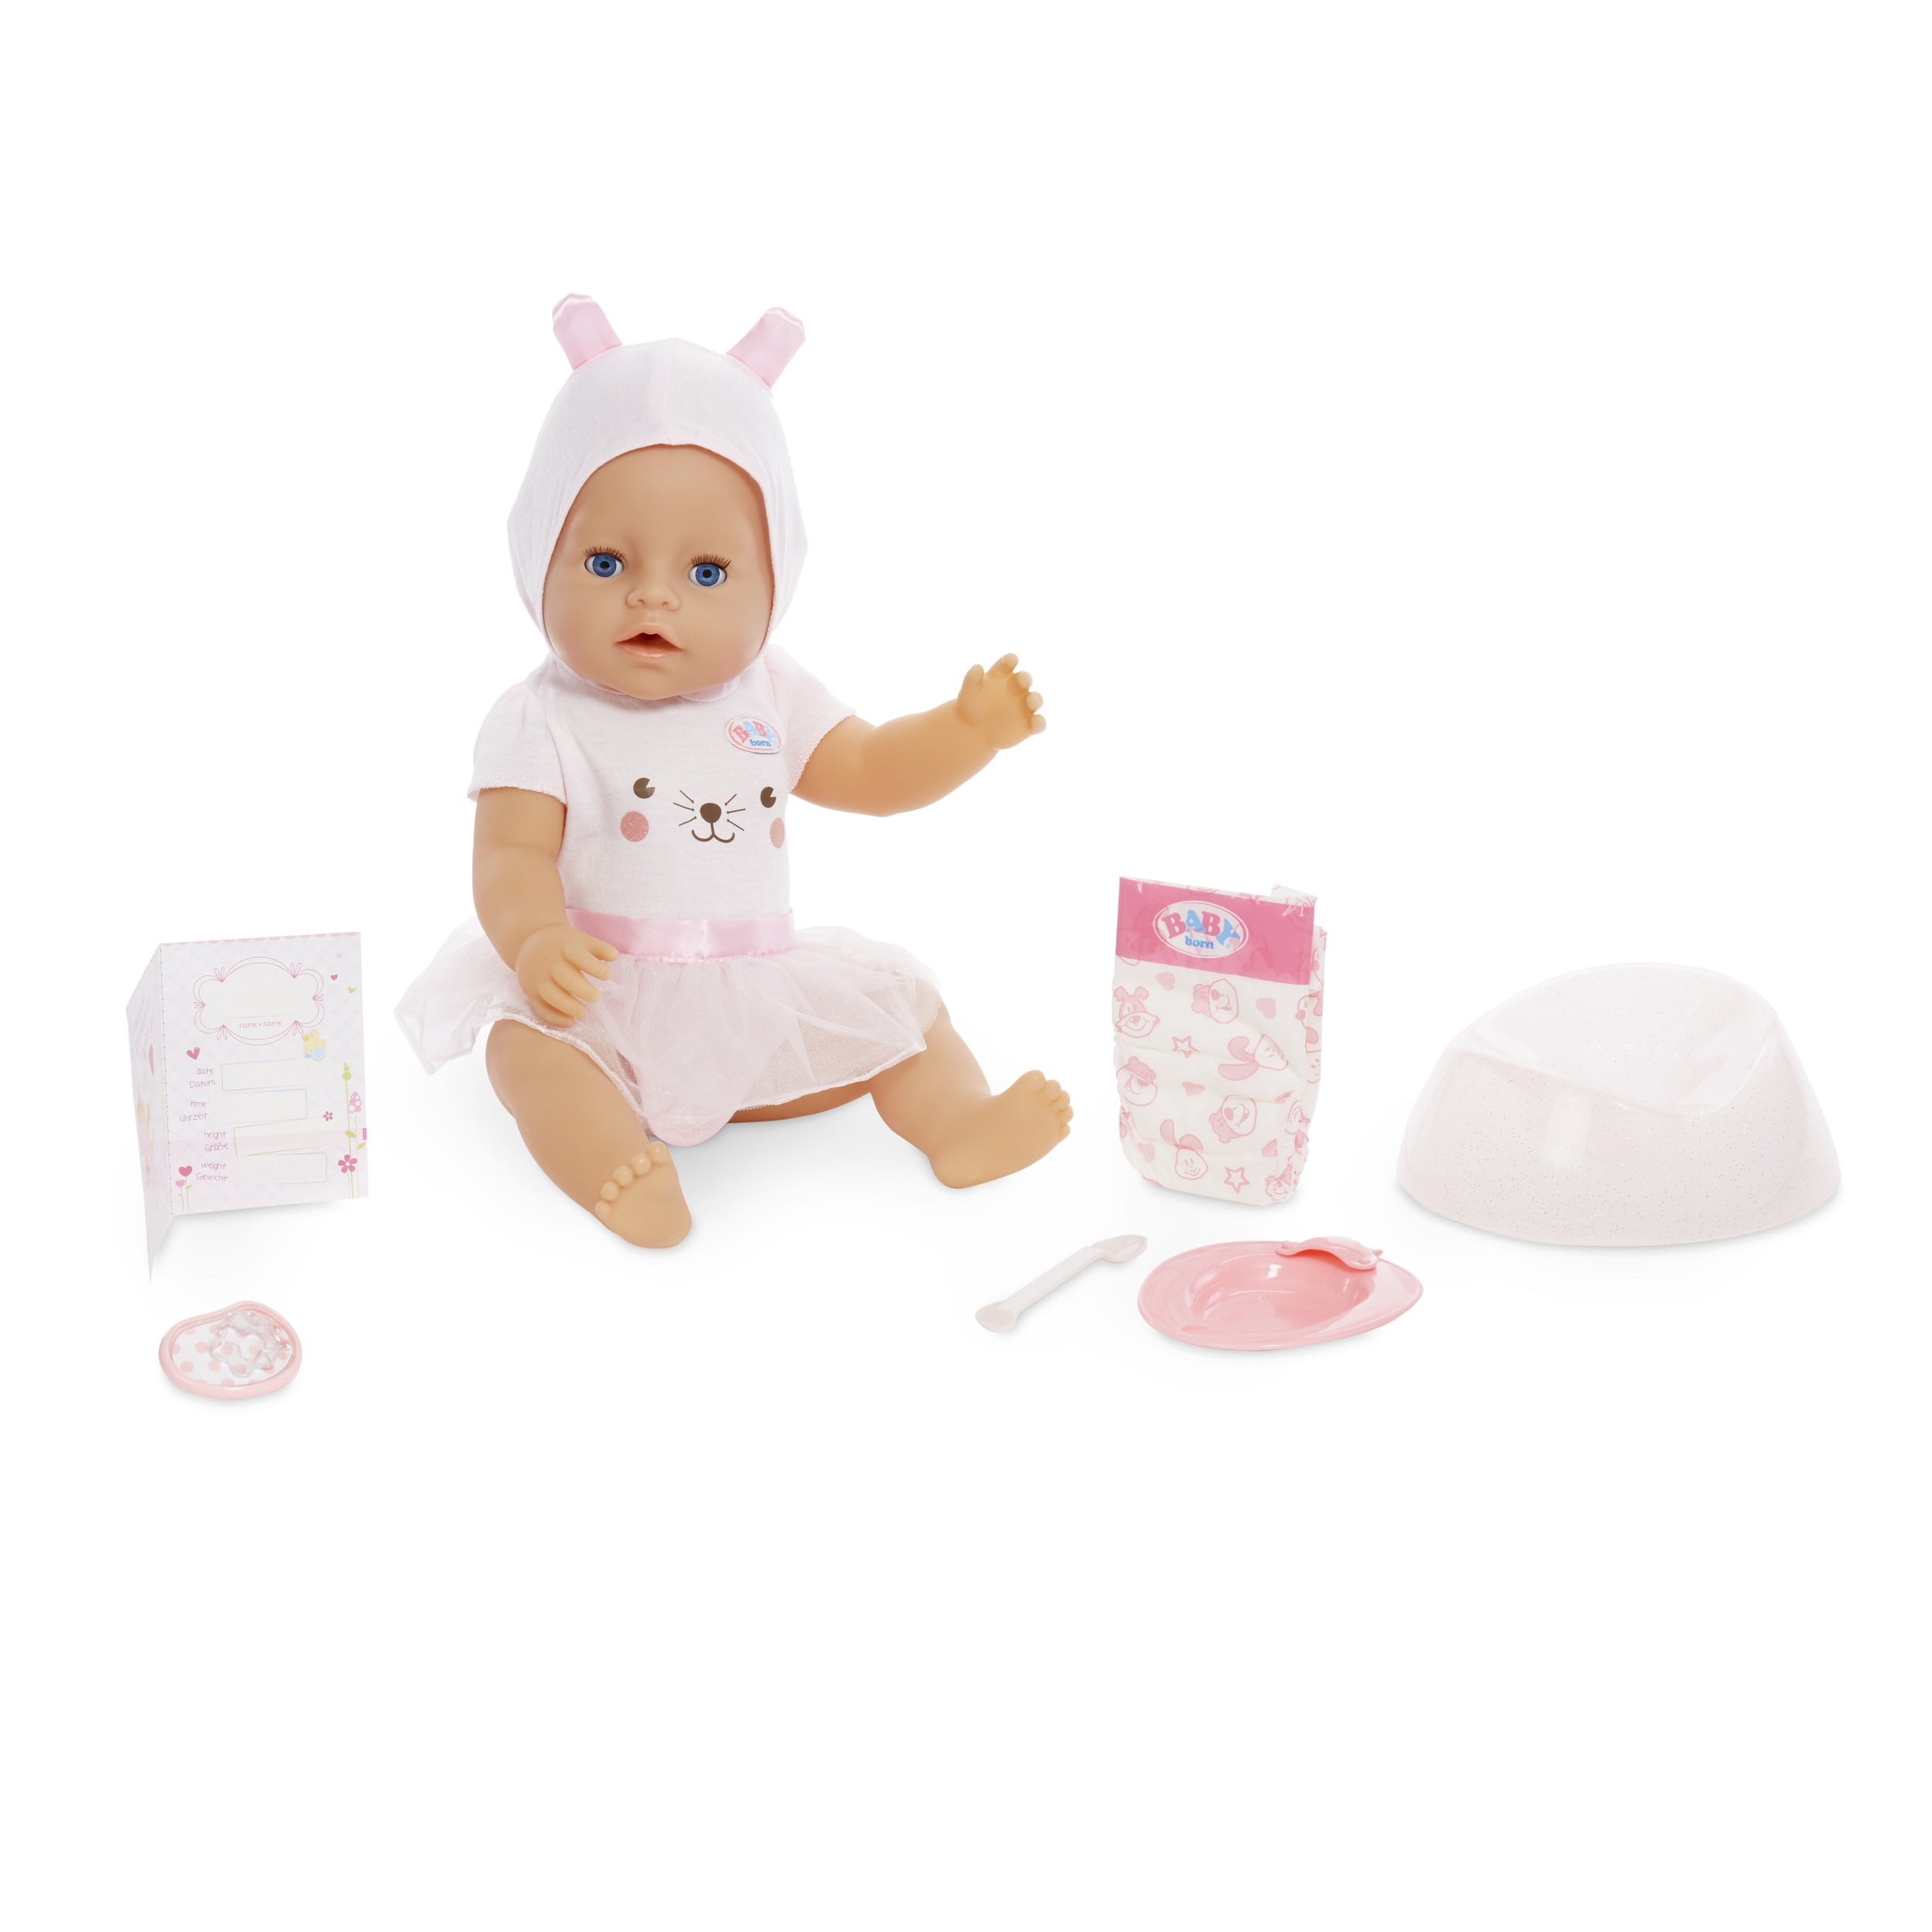 Baby Born Interactive Baby Doll Playset, 9 Pieces Included 